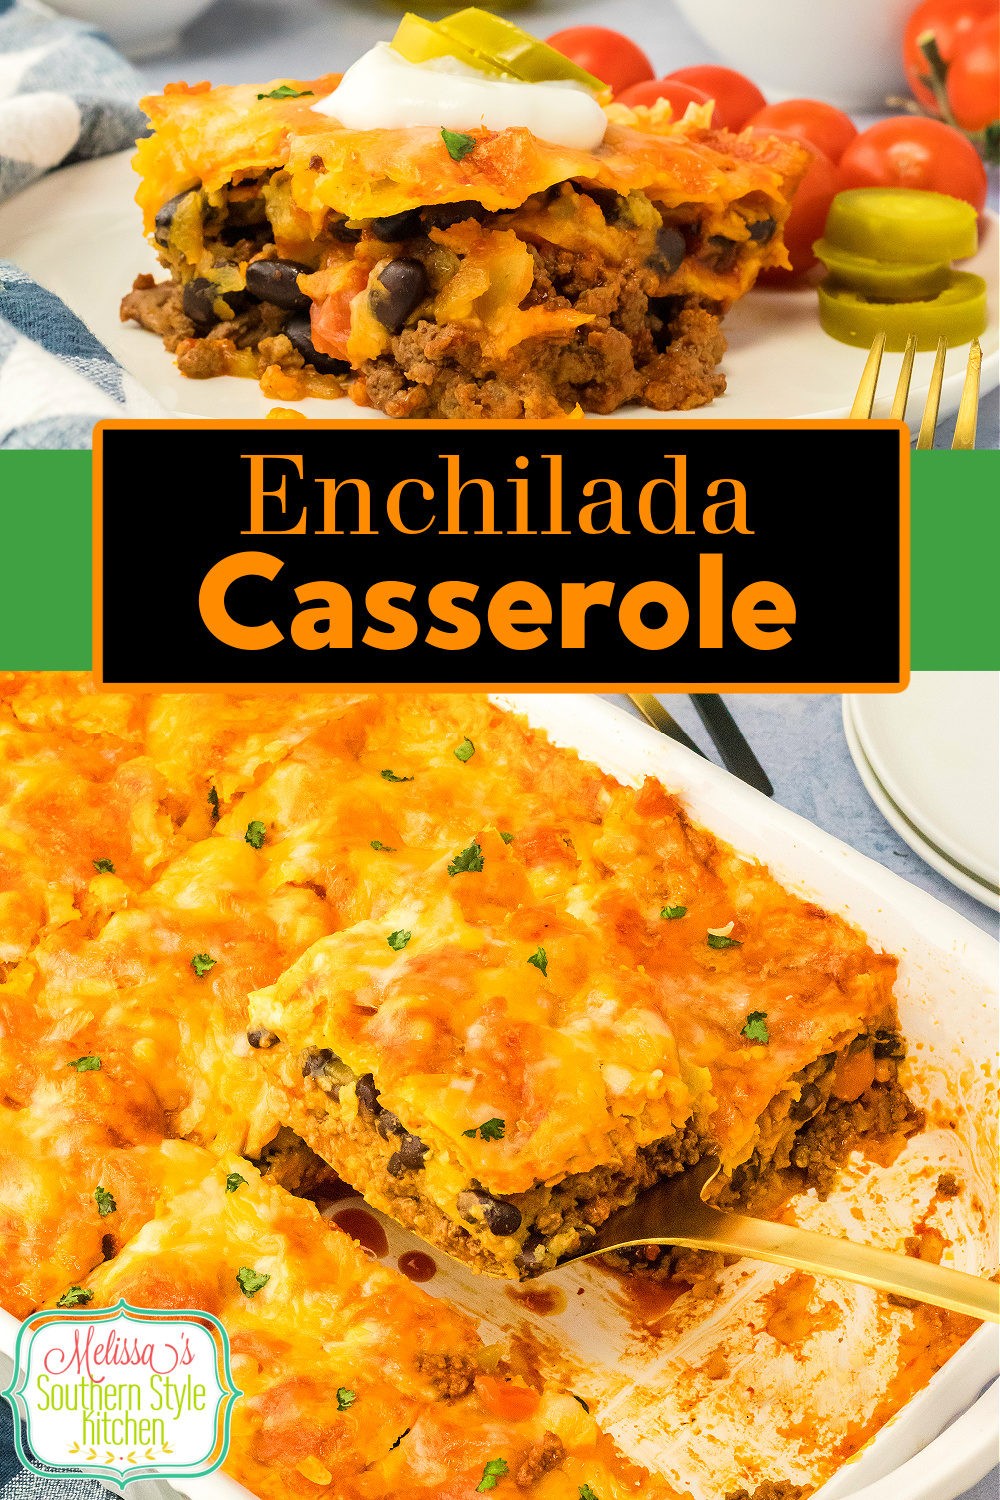 Serve this ground beef Enchilada Casserole recipe with your favorite Mexican inspired side dishes for a delicious fiesta at home. #enchiladas #enchiladacasserole #easycasserolerecipes #casseroles #mexicanrecipes #easygroundbeefrecipes #beefenchiladas